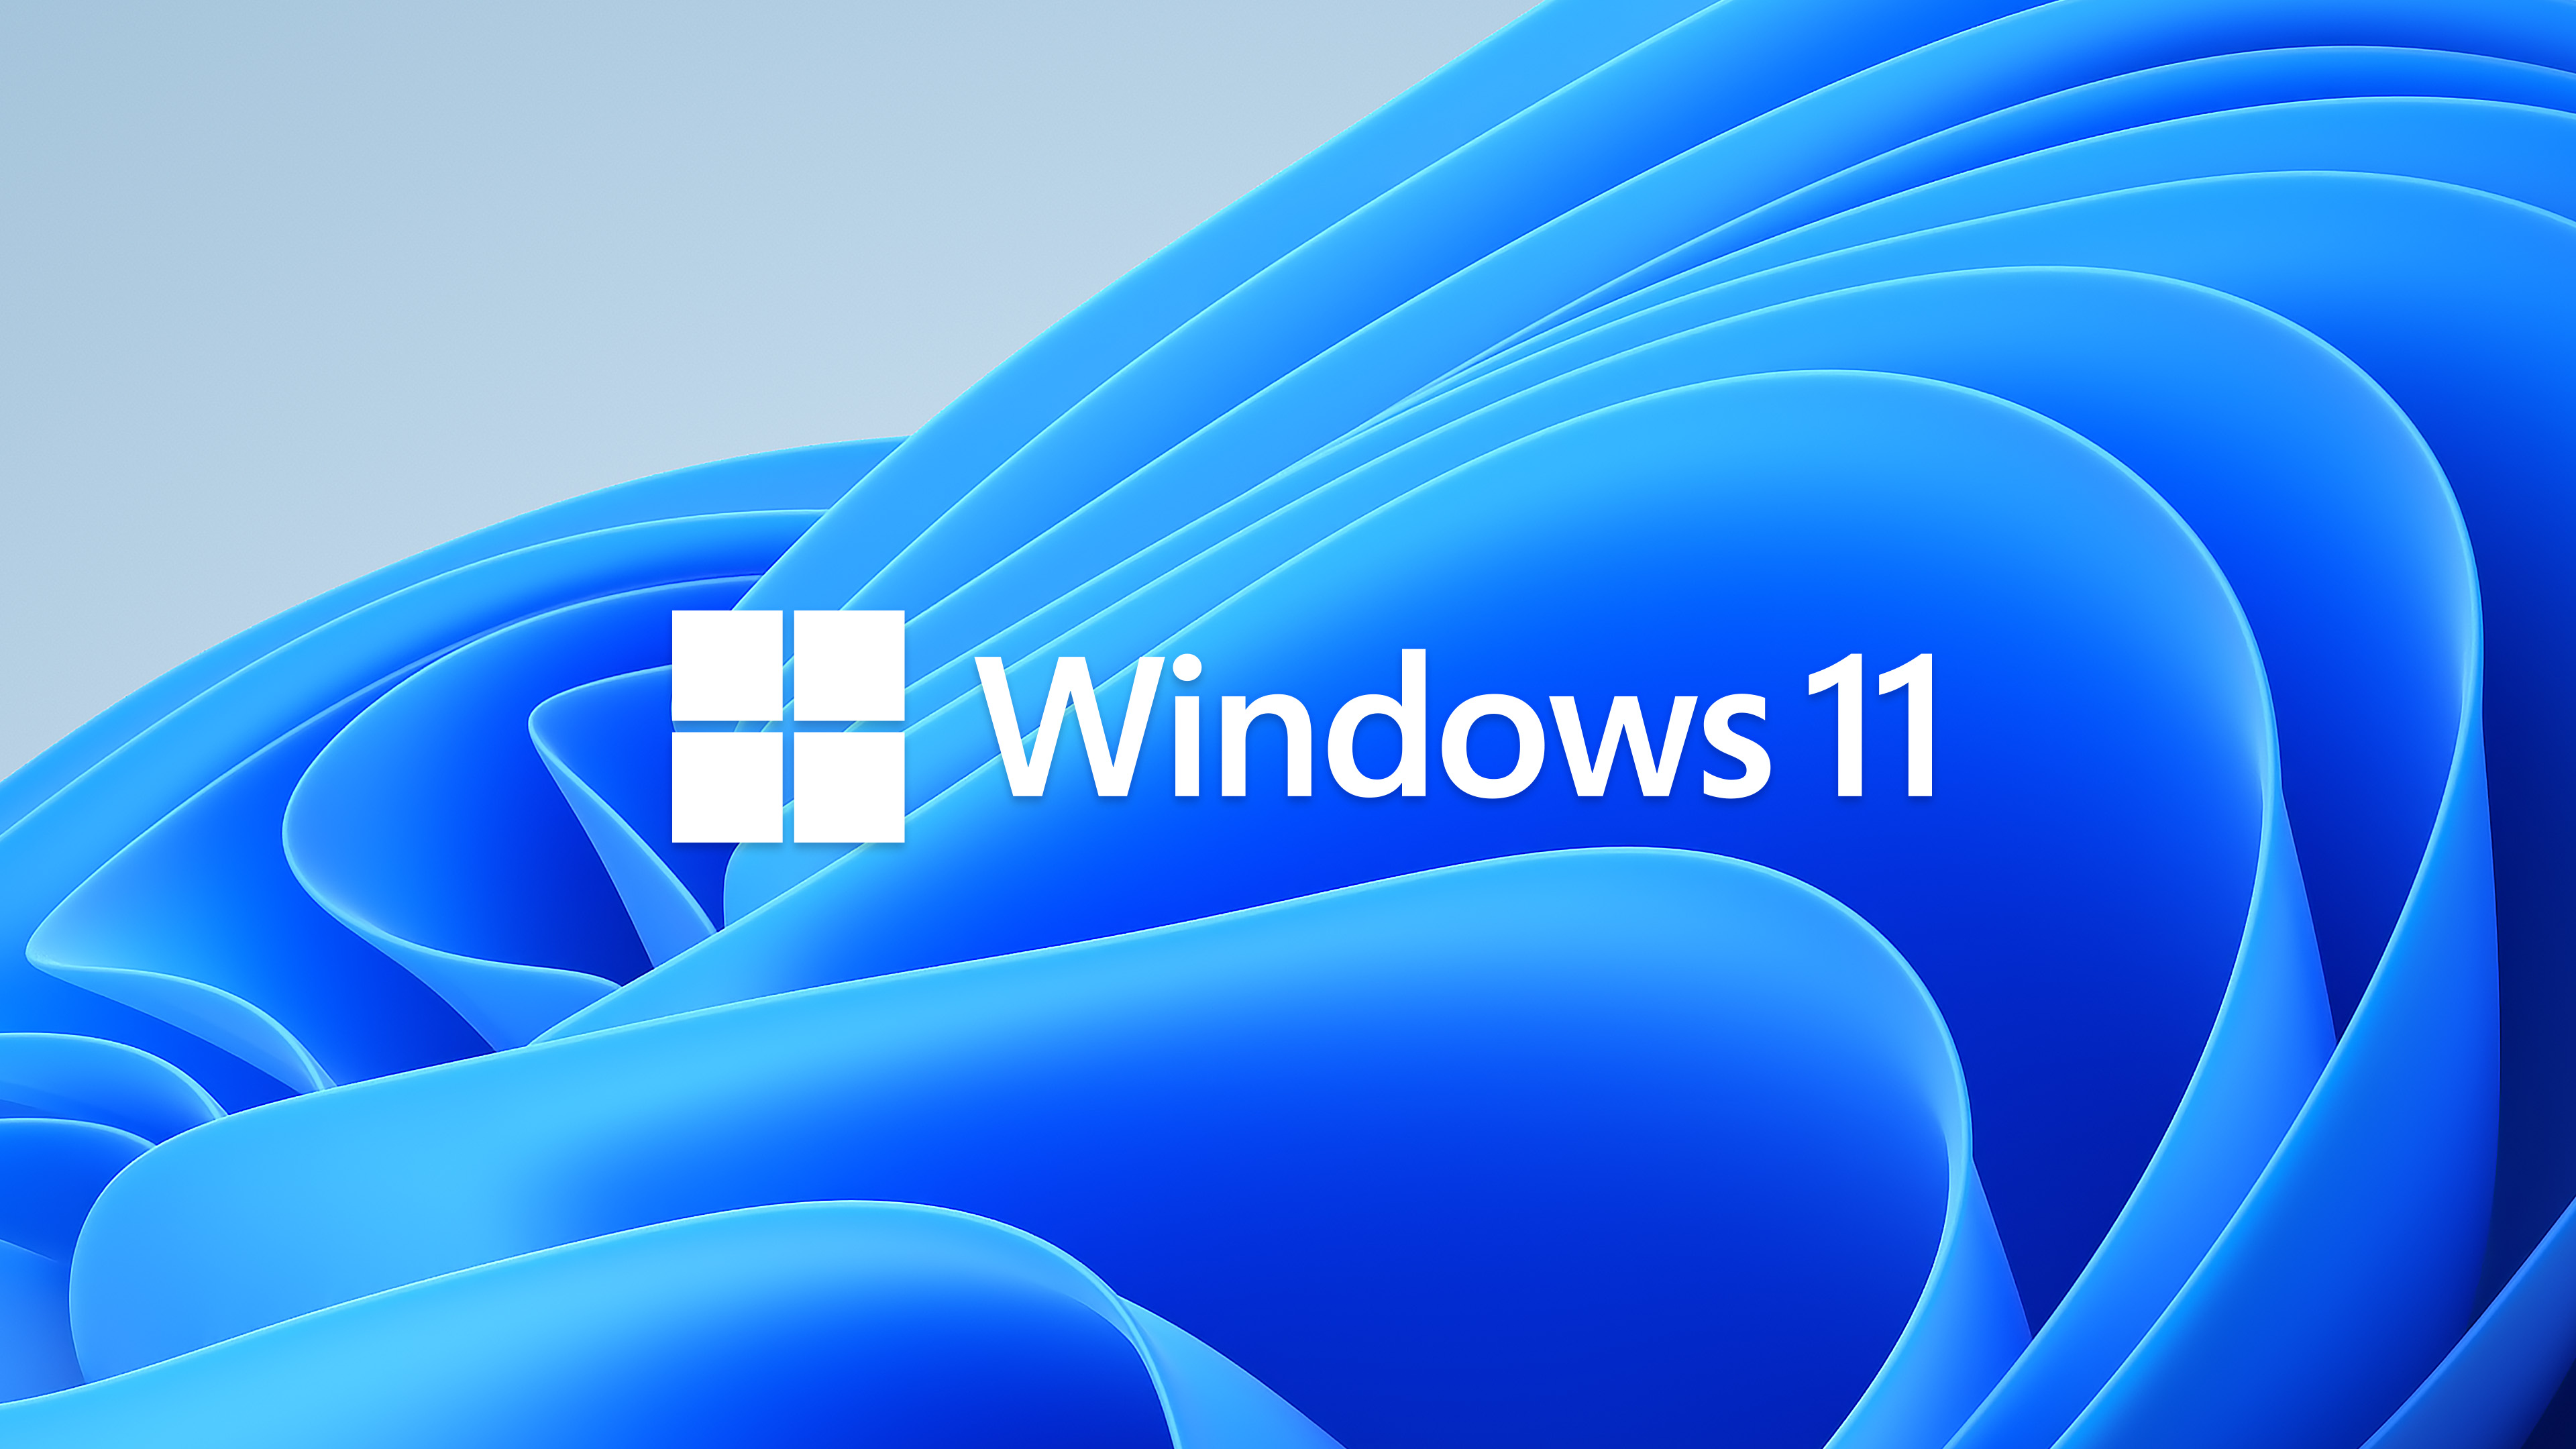 Windows 11 release date published